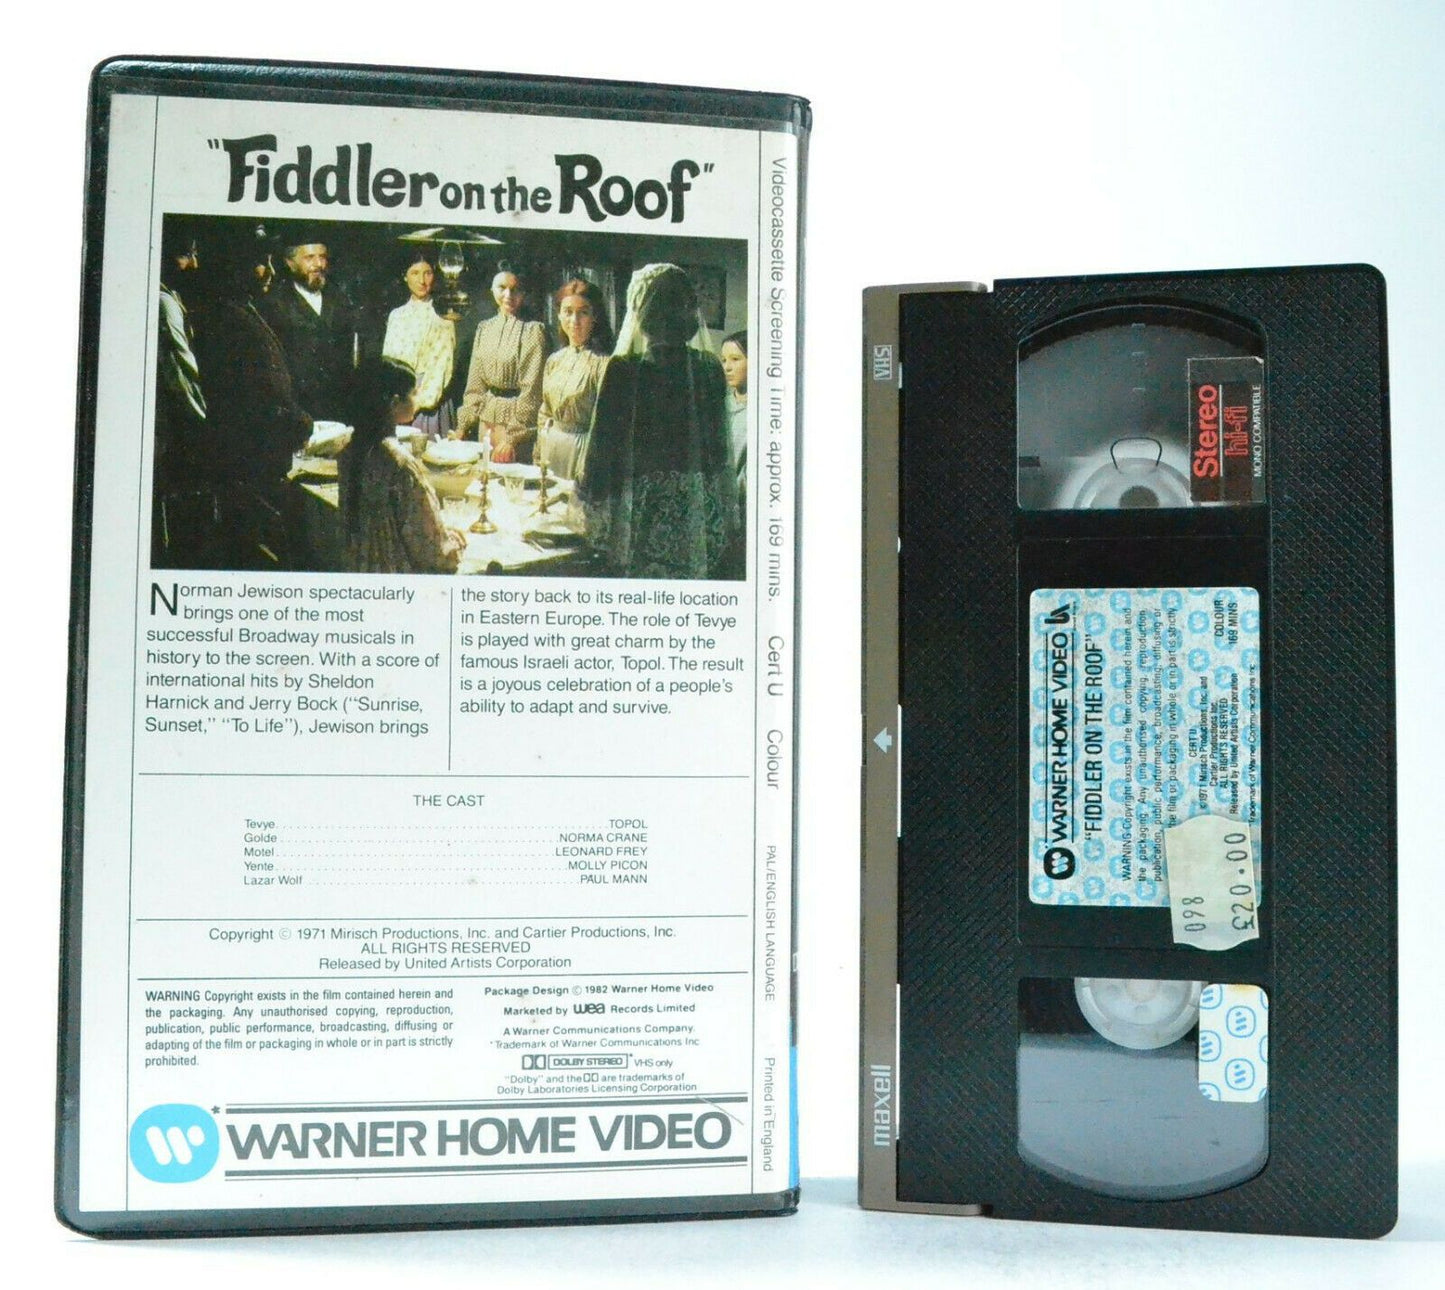 Fiddler On The Roof: Classic Musical (1971) - Large Box - Topol/N.Jewison - VHS-